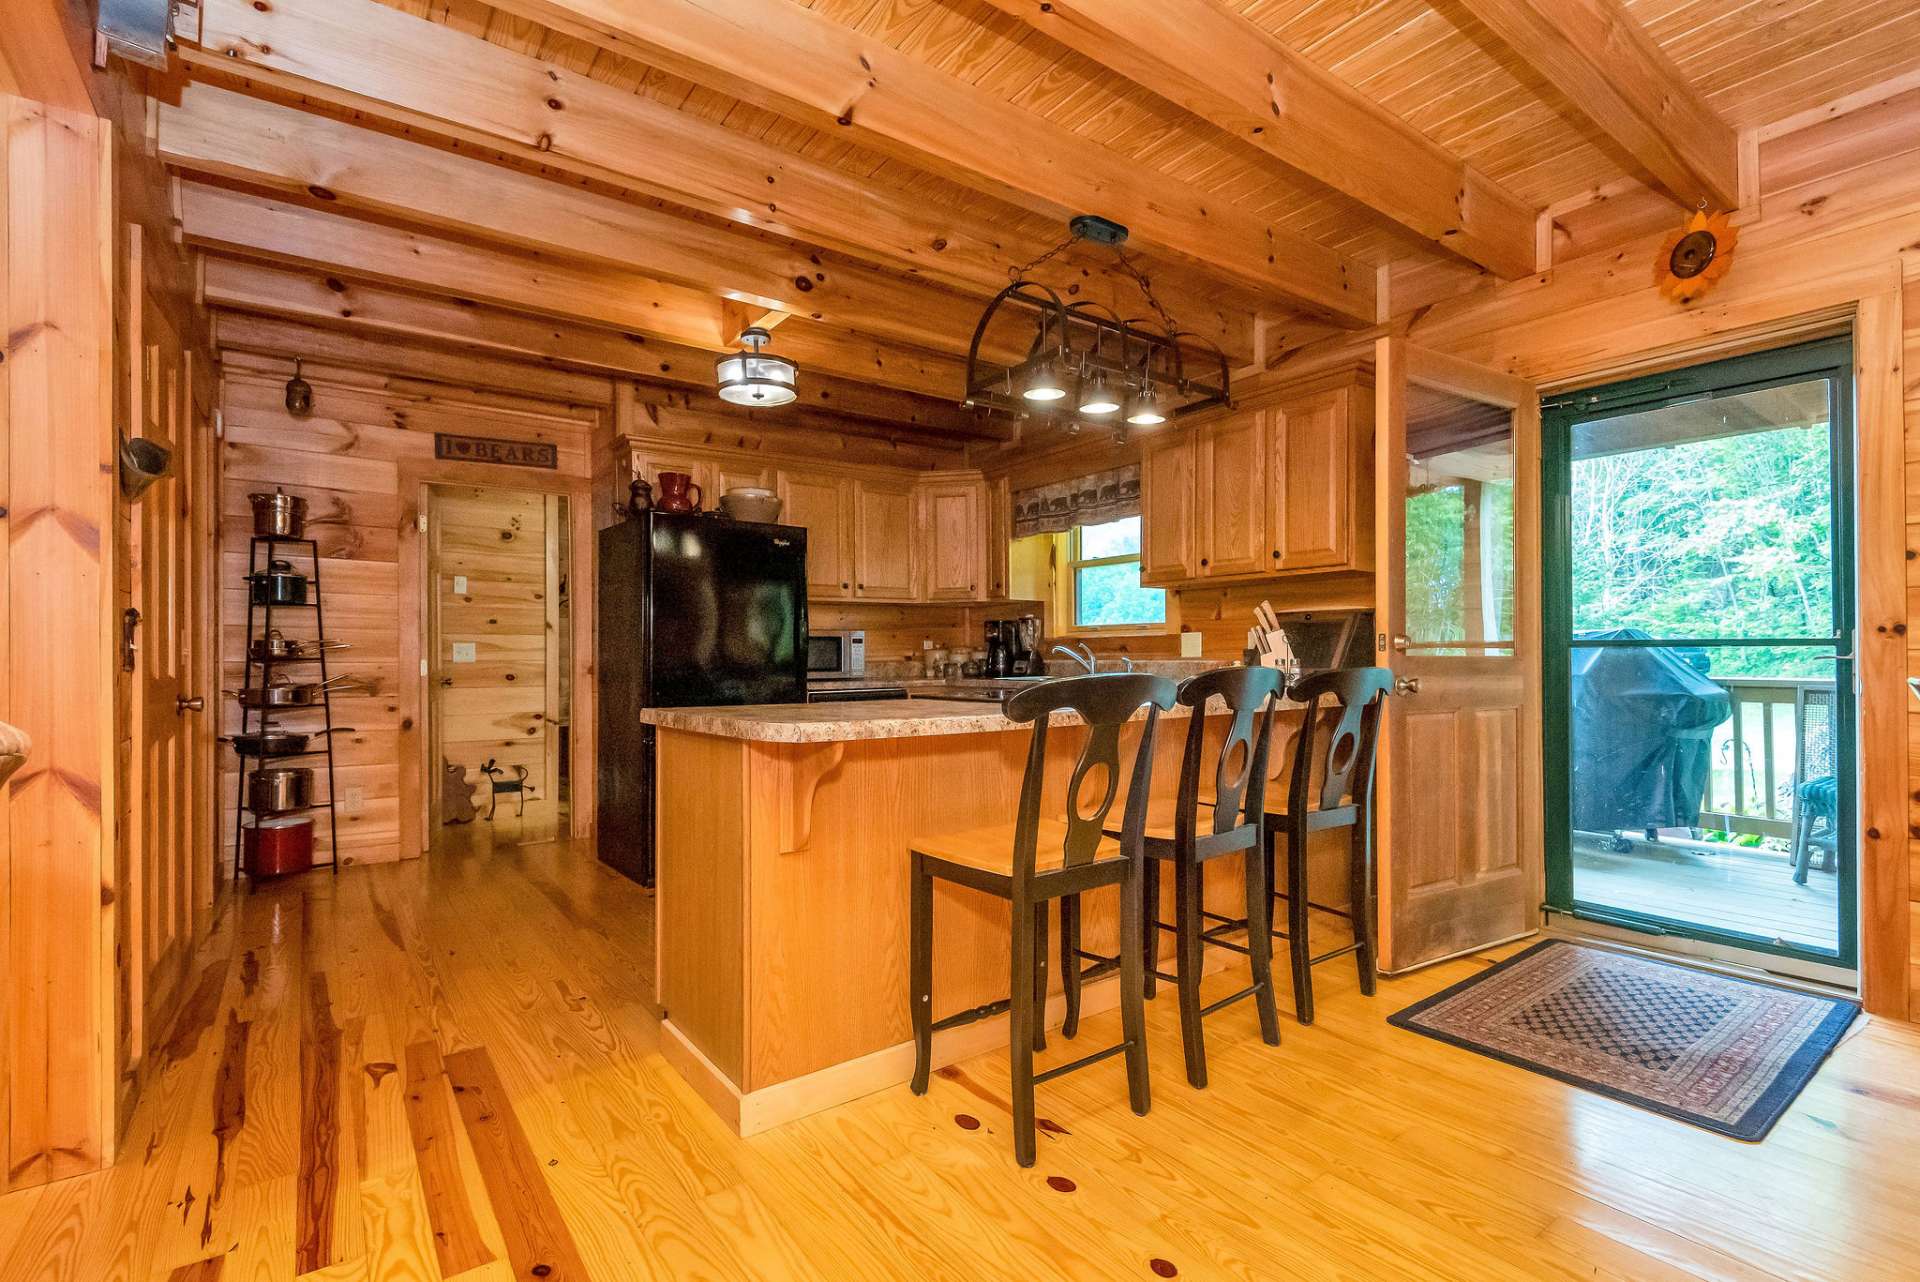 Step inside to be greeted by warm rustic charm.